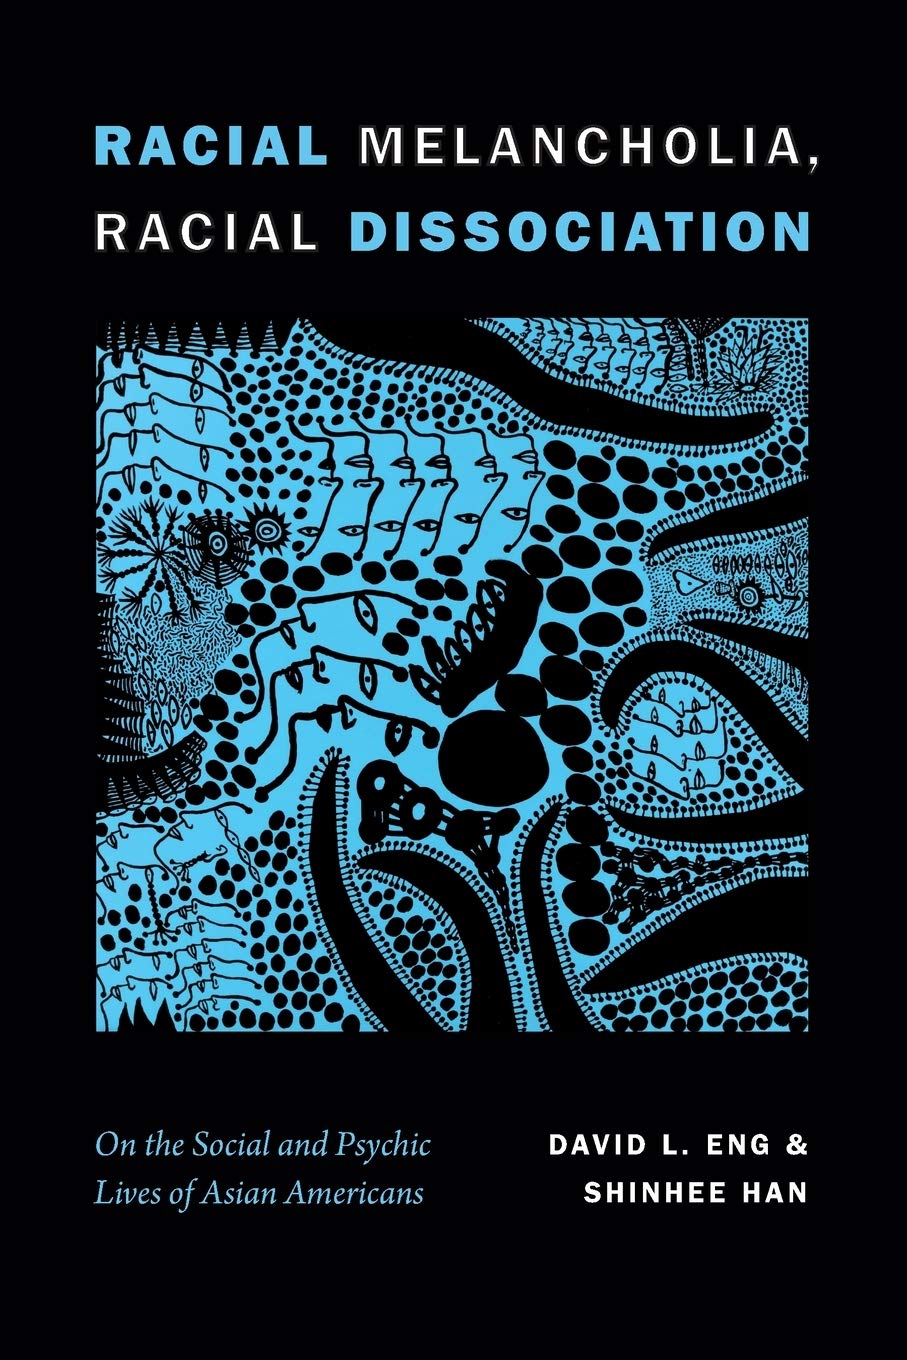 Racial Melancholia, Racial Dissociation: On the Social and Psychic Lives of Asian Americans by David L. Eng, Shinhee Han